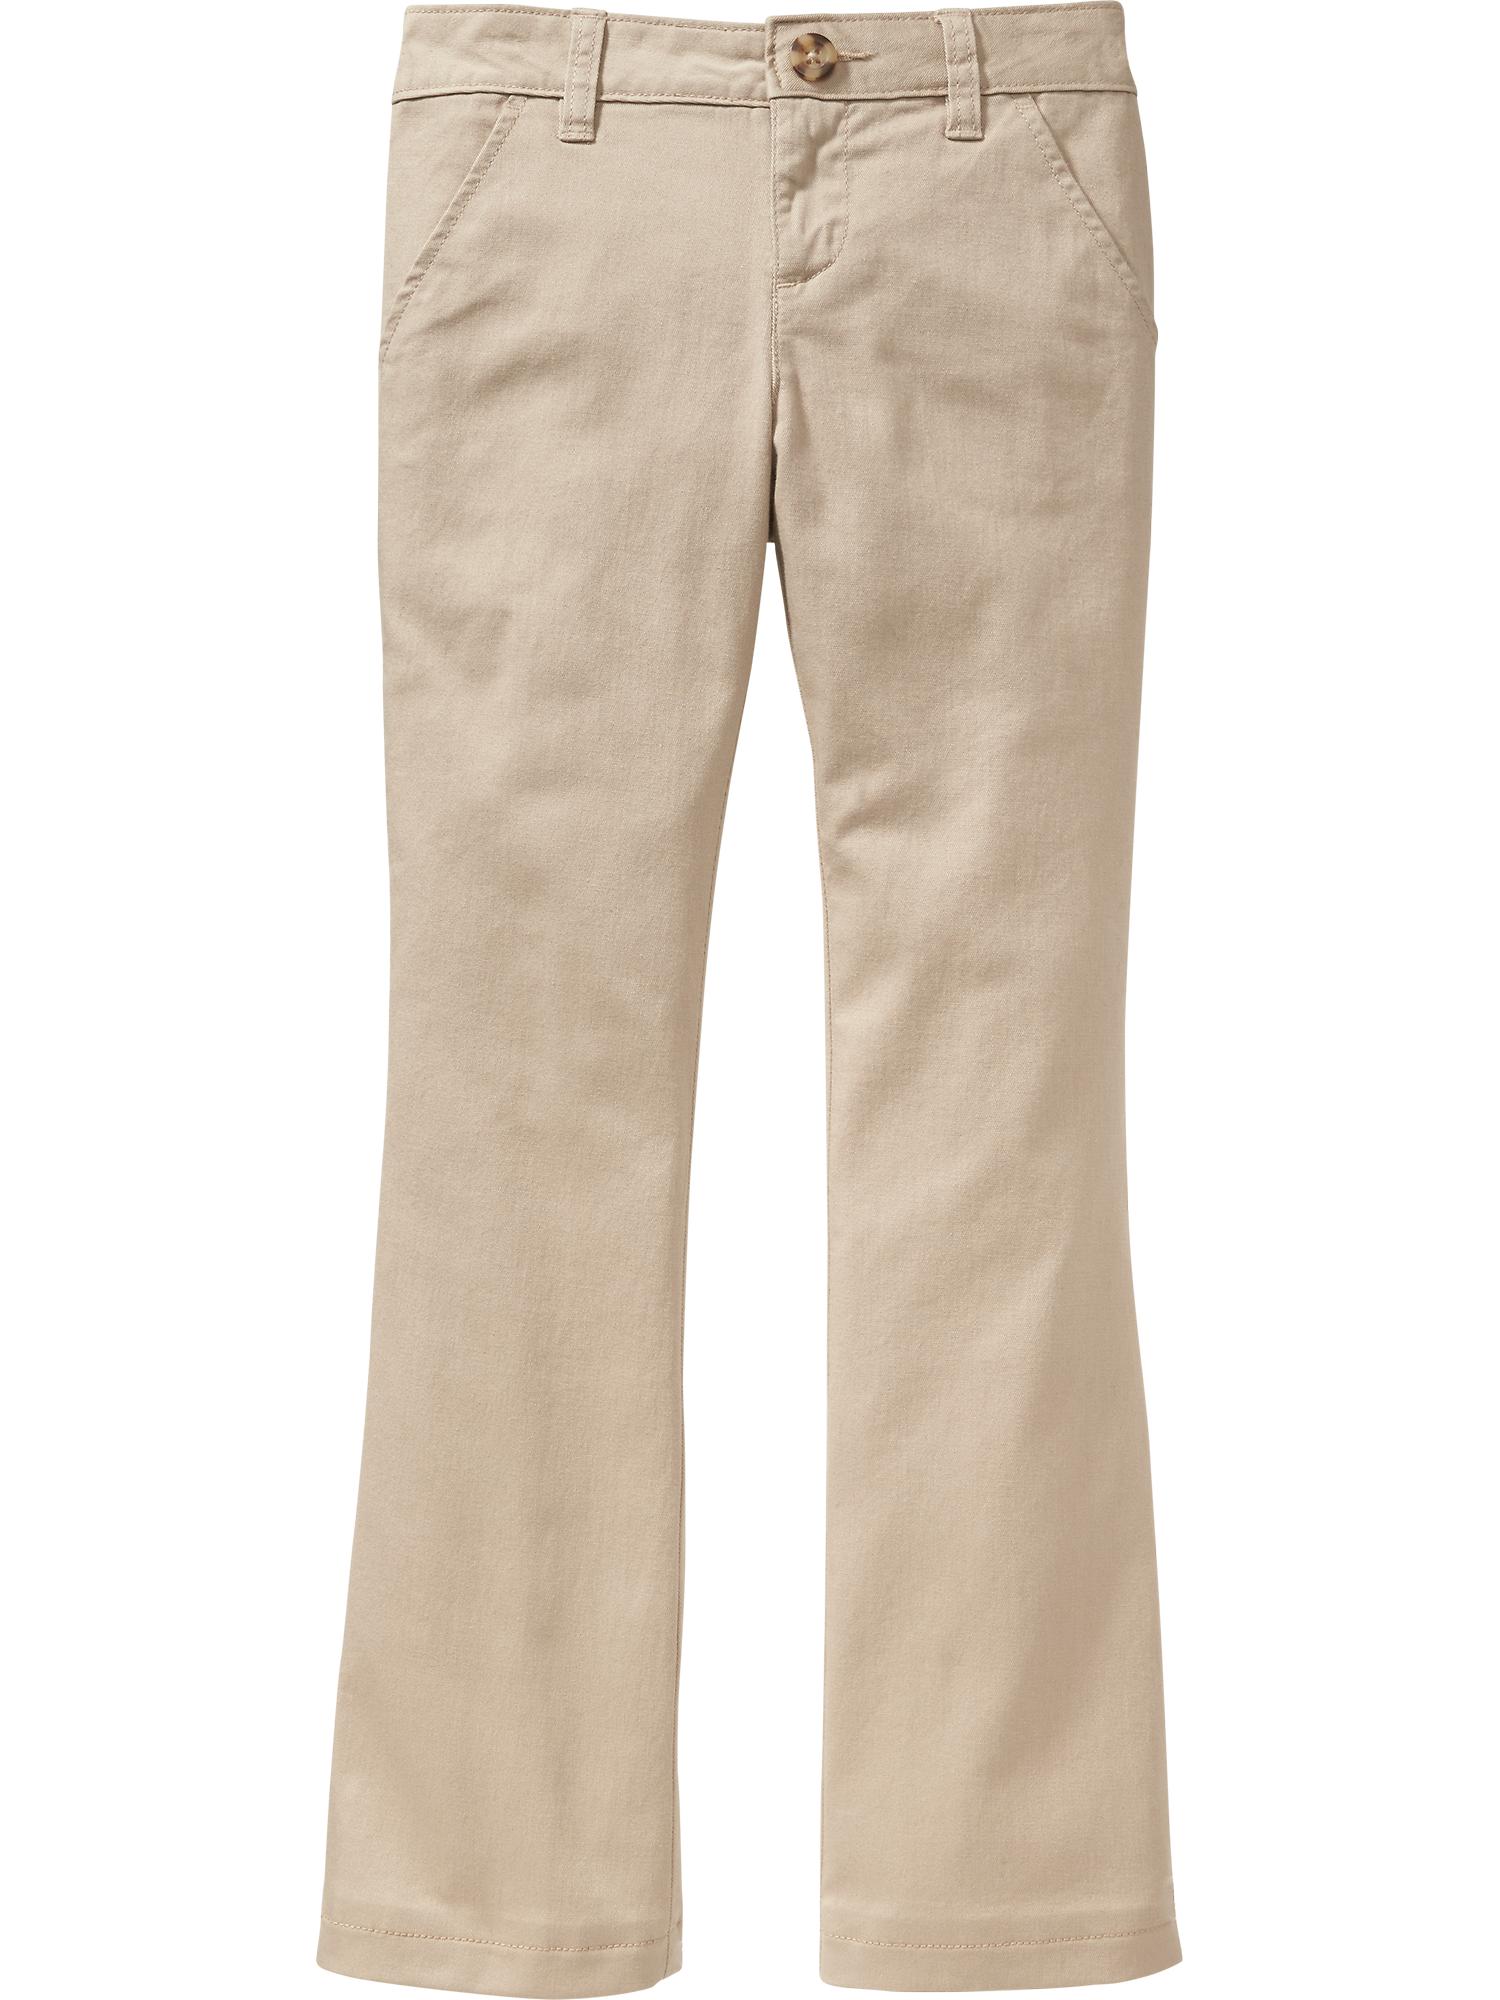 Uniform Bootcut Pants for Girls | Old Navy